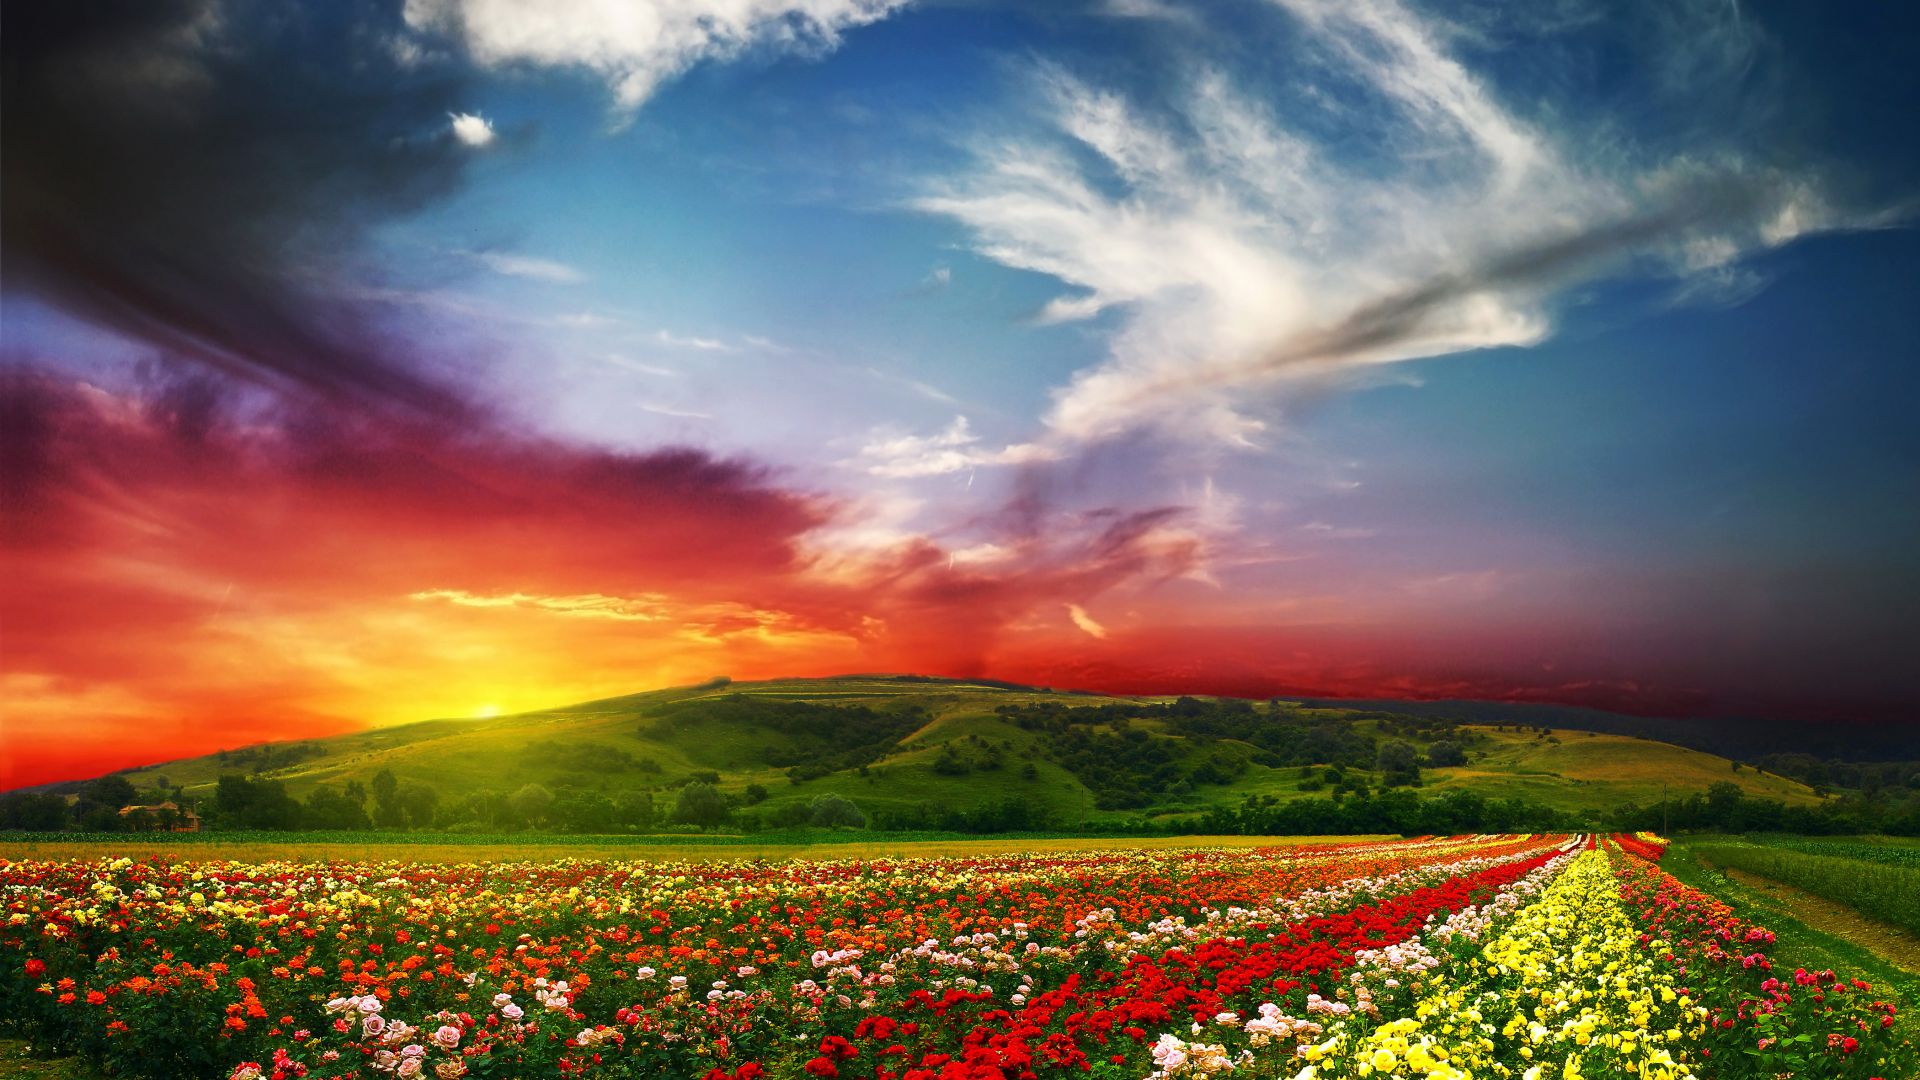 India, 5k, 4k wallpaper, Valley of Flowers, Meadows, roses, sunset, clouds (horizontal)